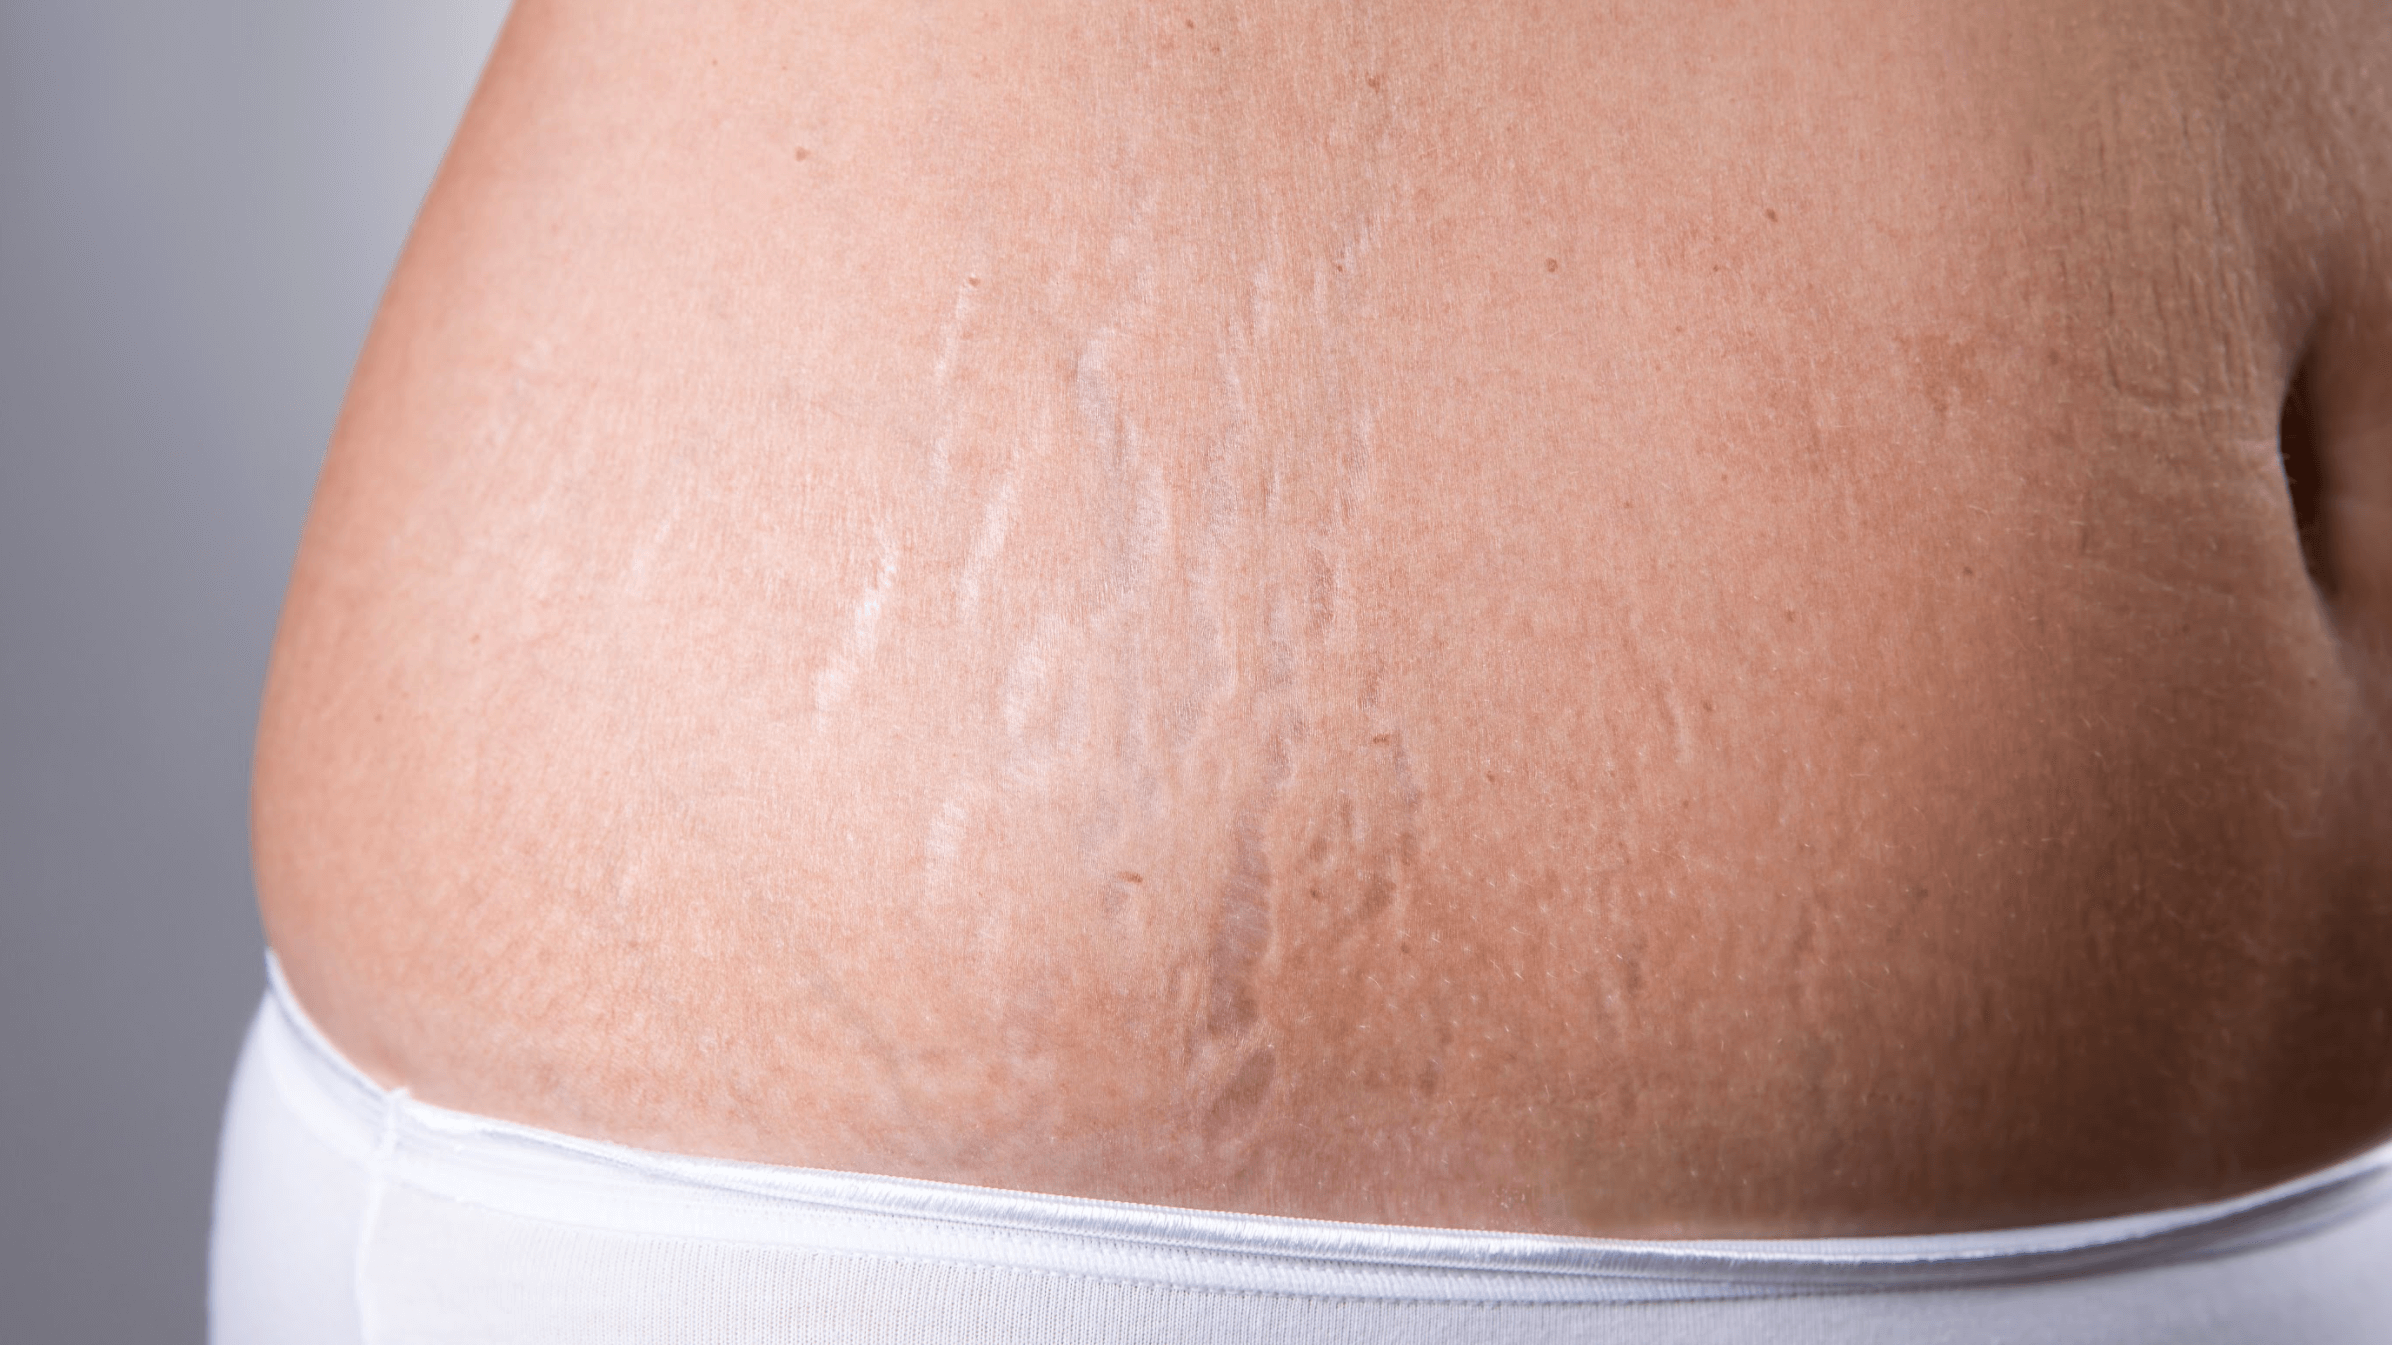 plus size overweight woman with stretches marks on her skin and a